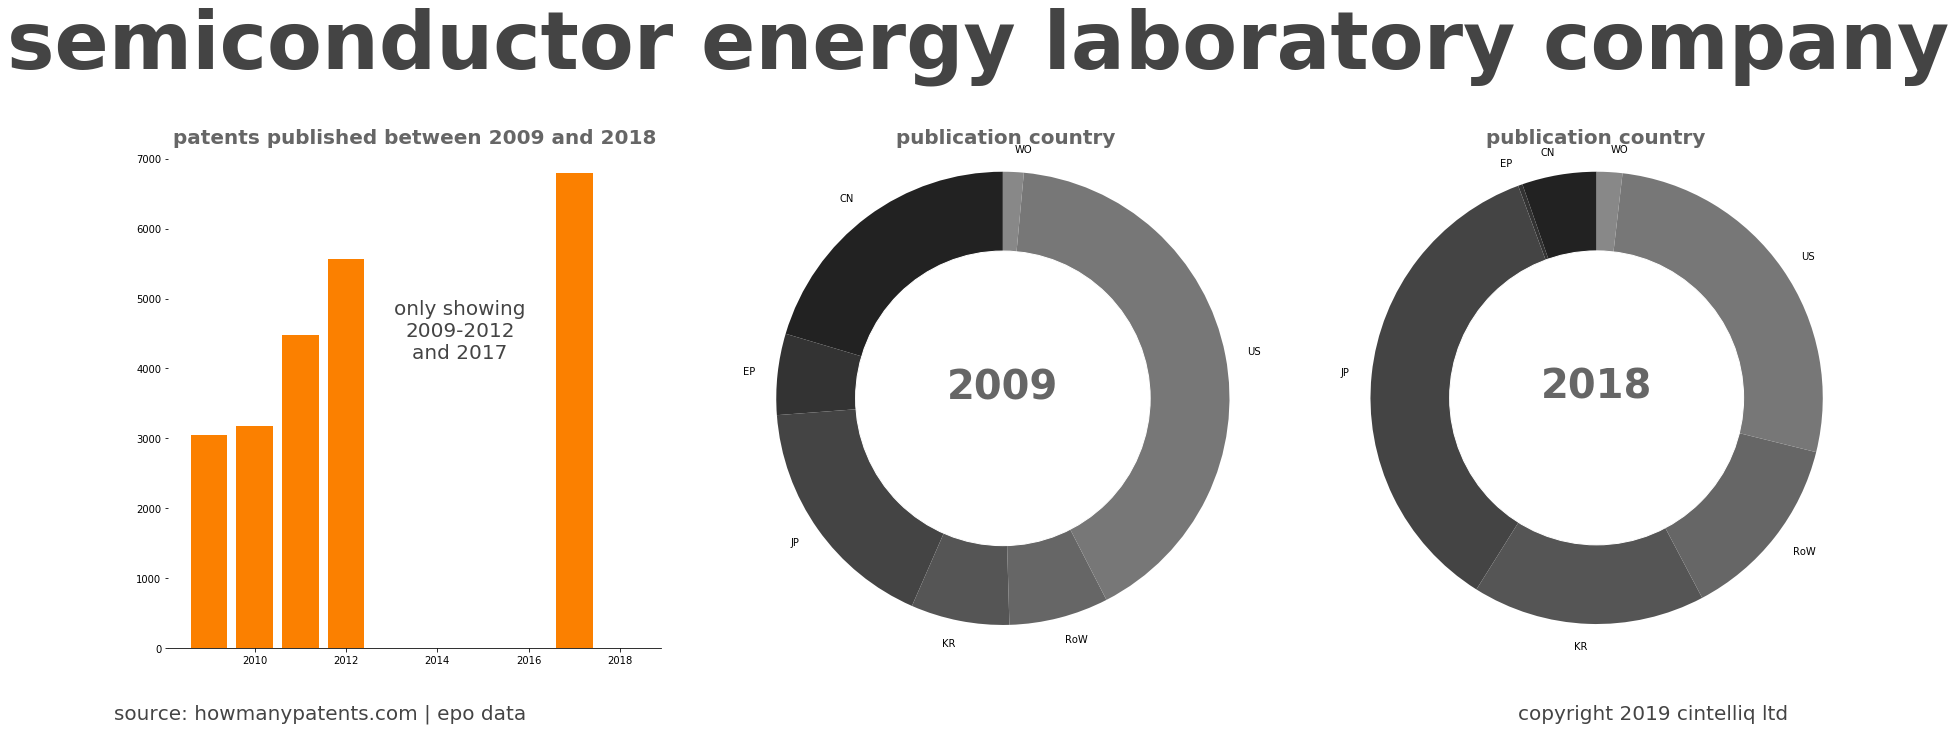 summary of patents for Semiconductor Energy Laboratory Company